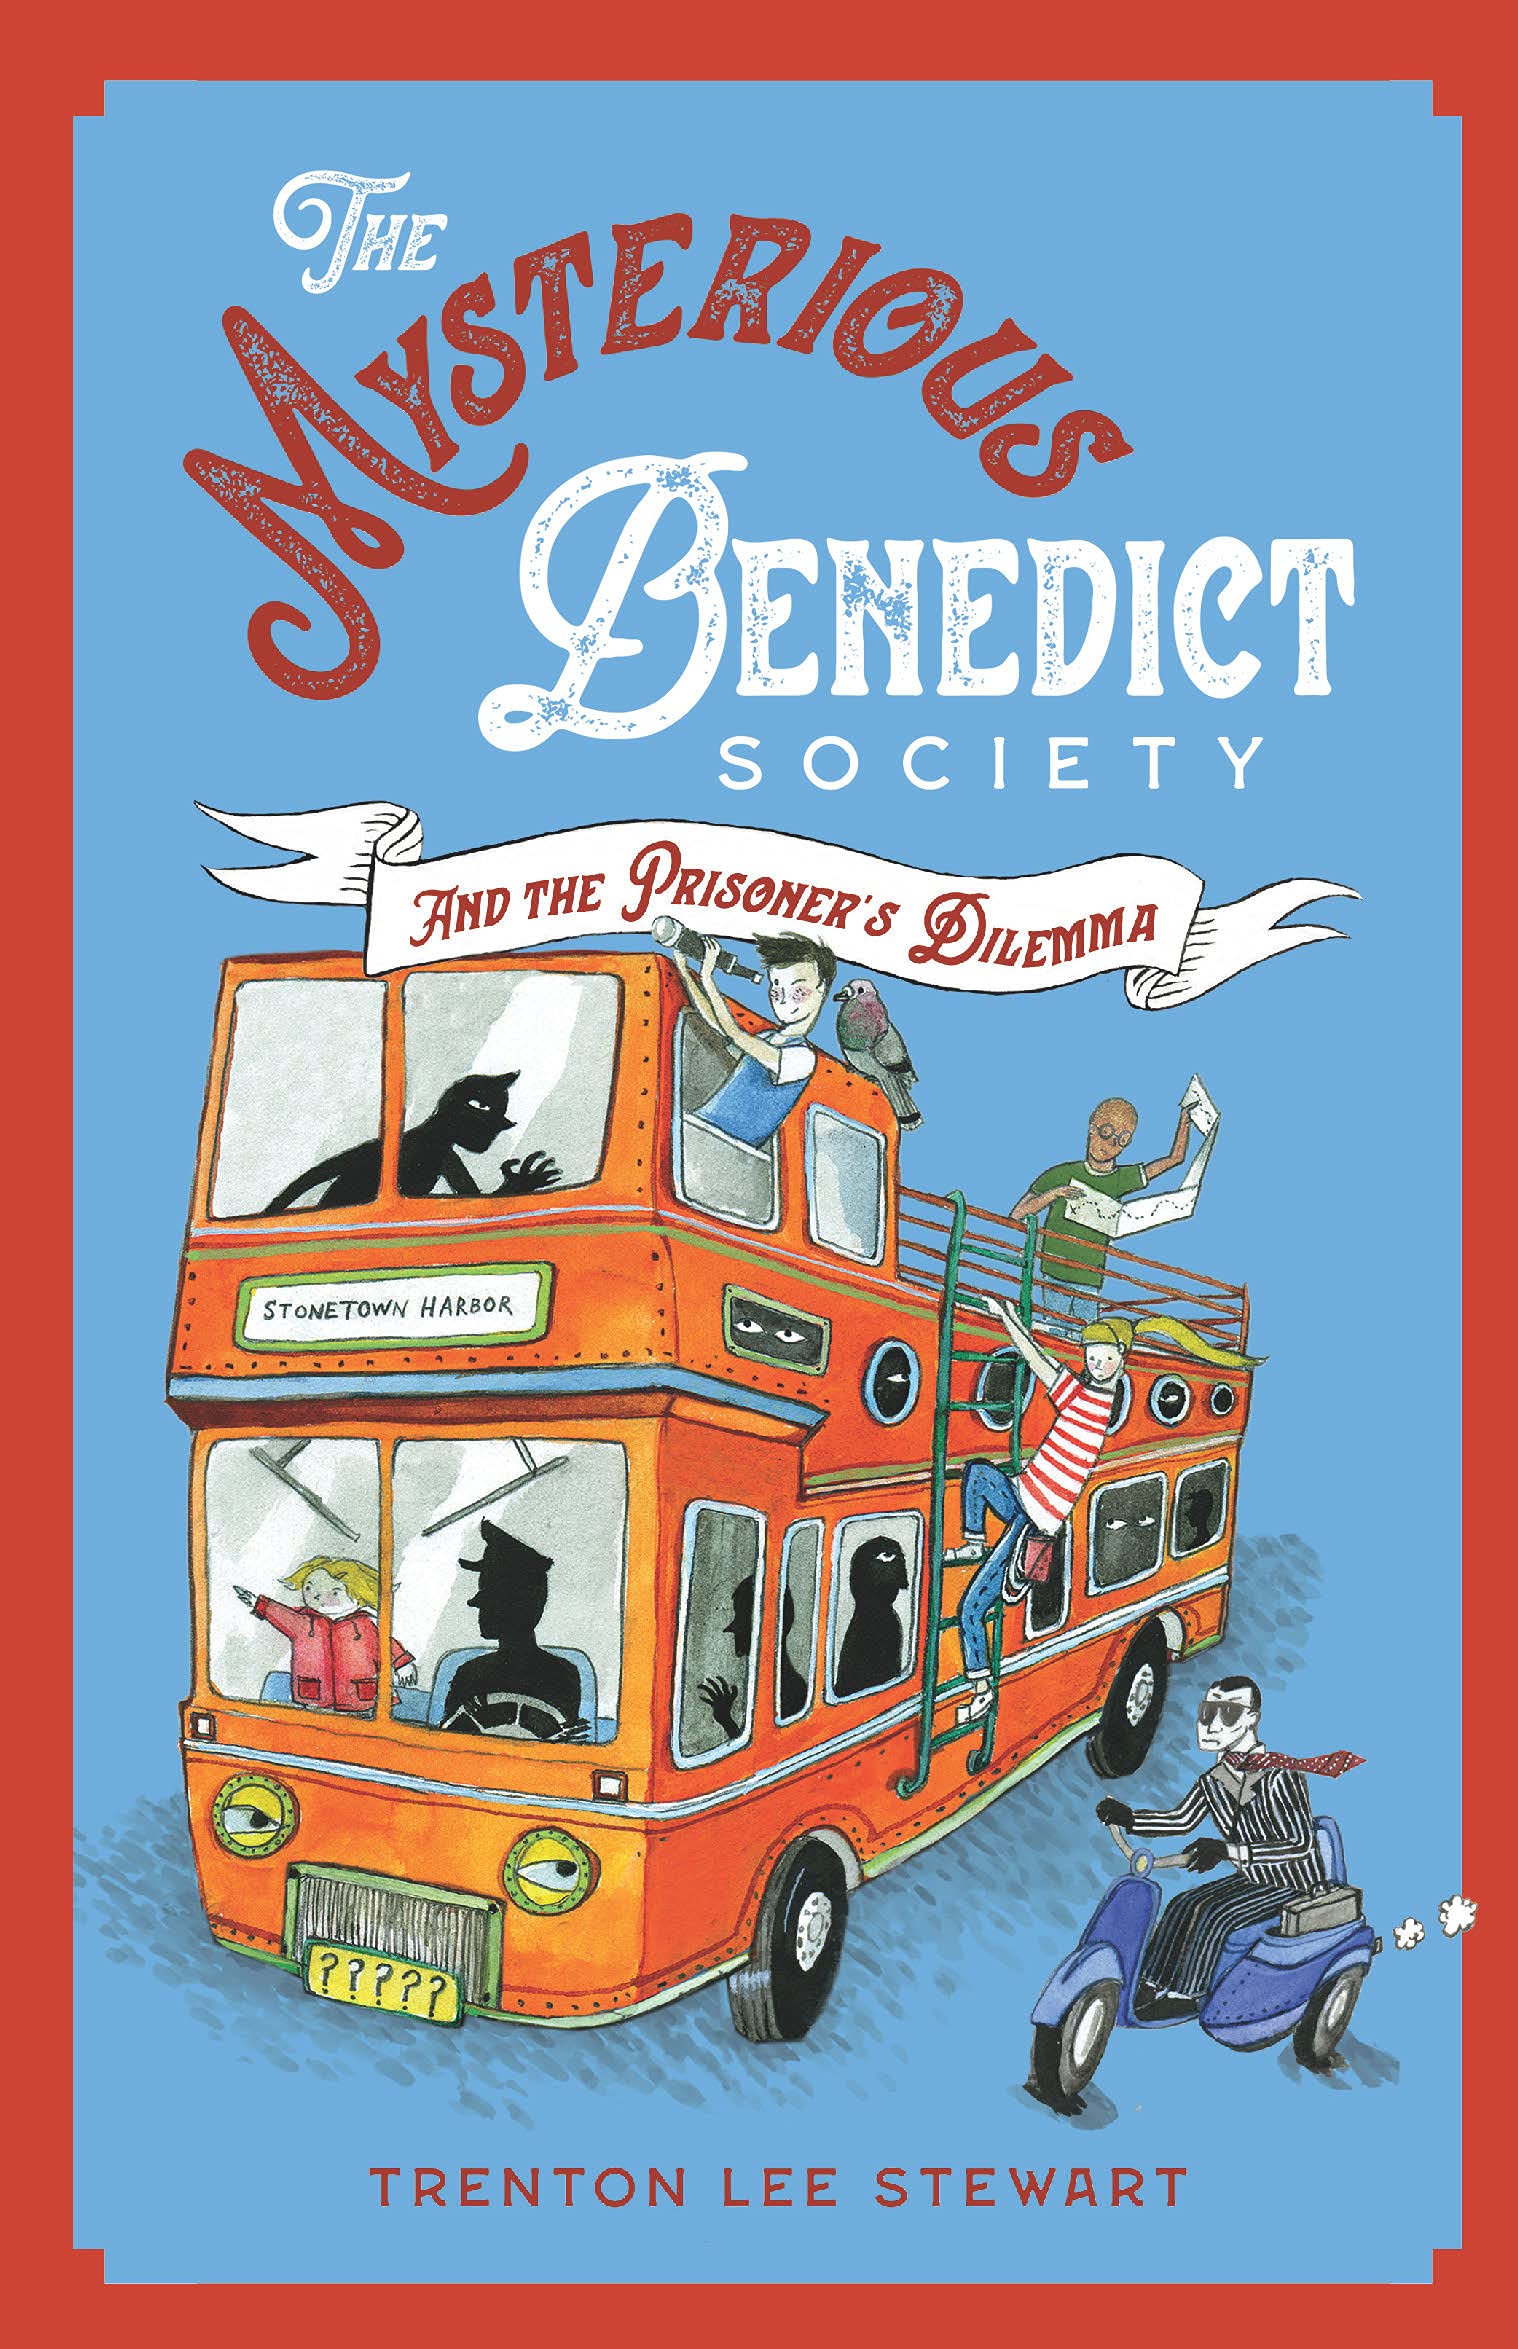 The Mysterious Benedict Society Book 3: The Mysterious Benedict Society and the Prisoners Dilemma